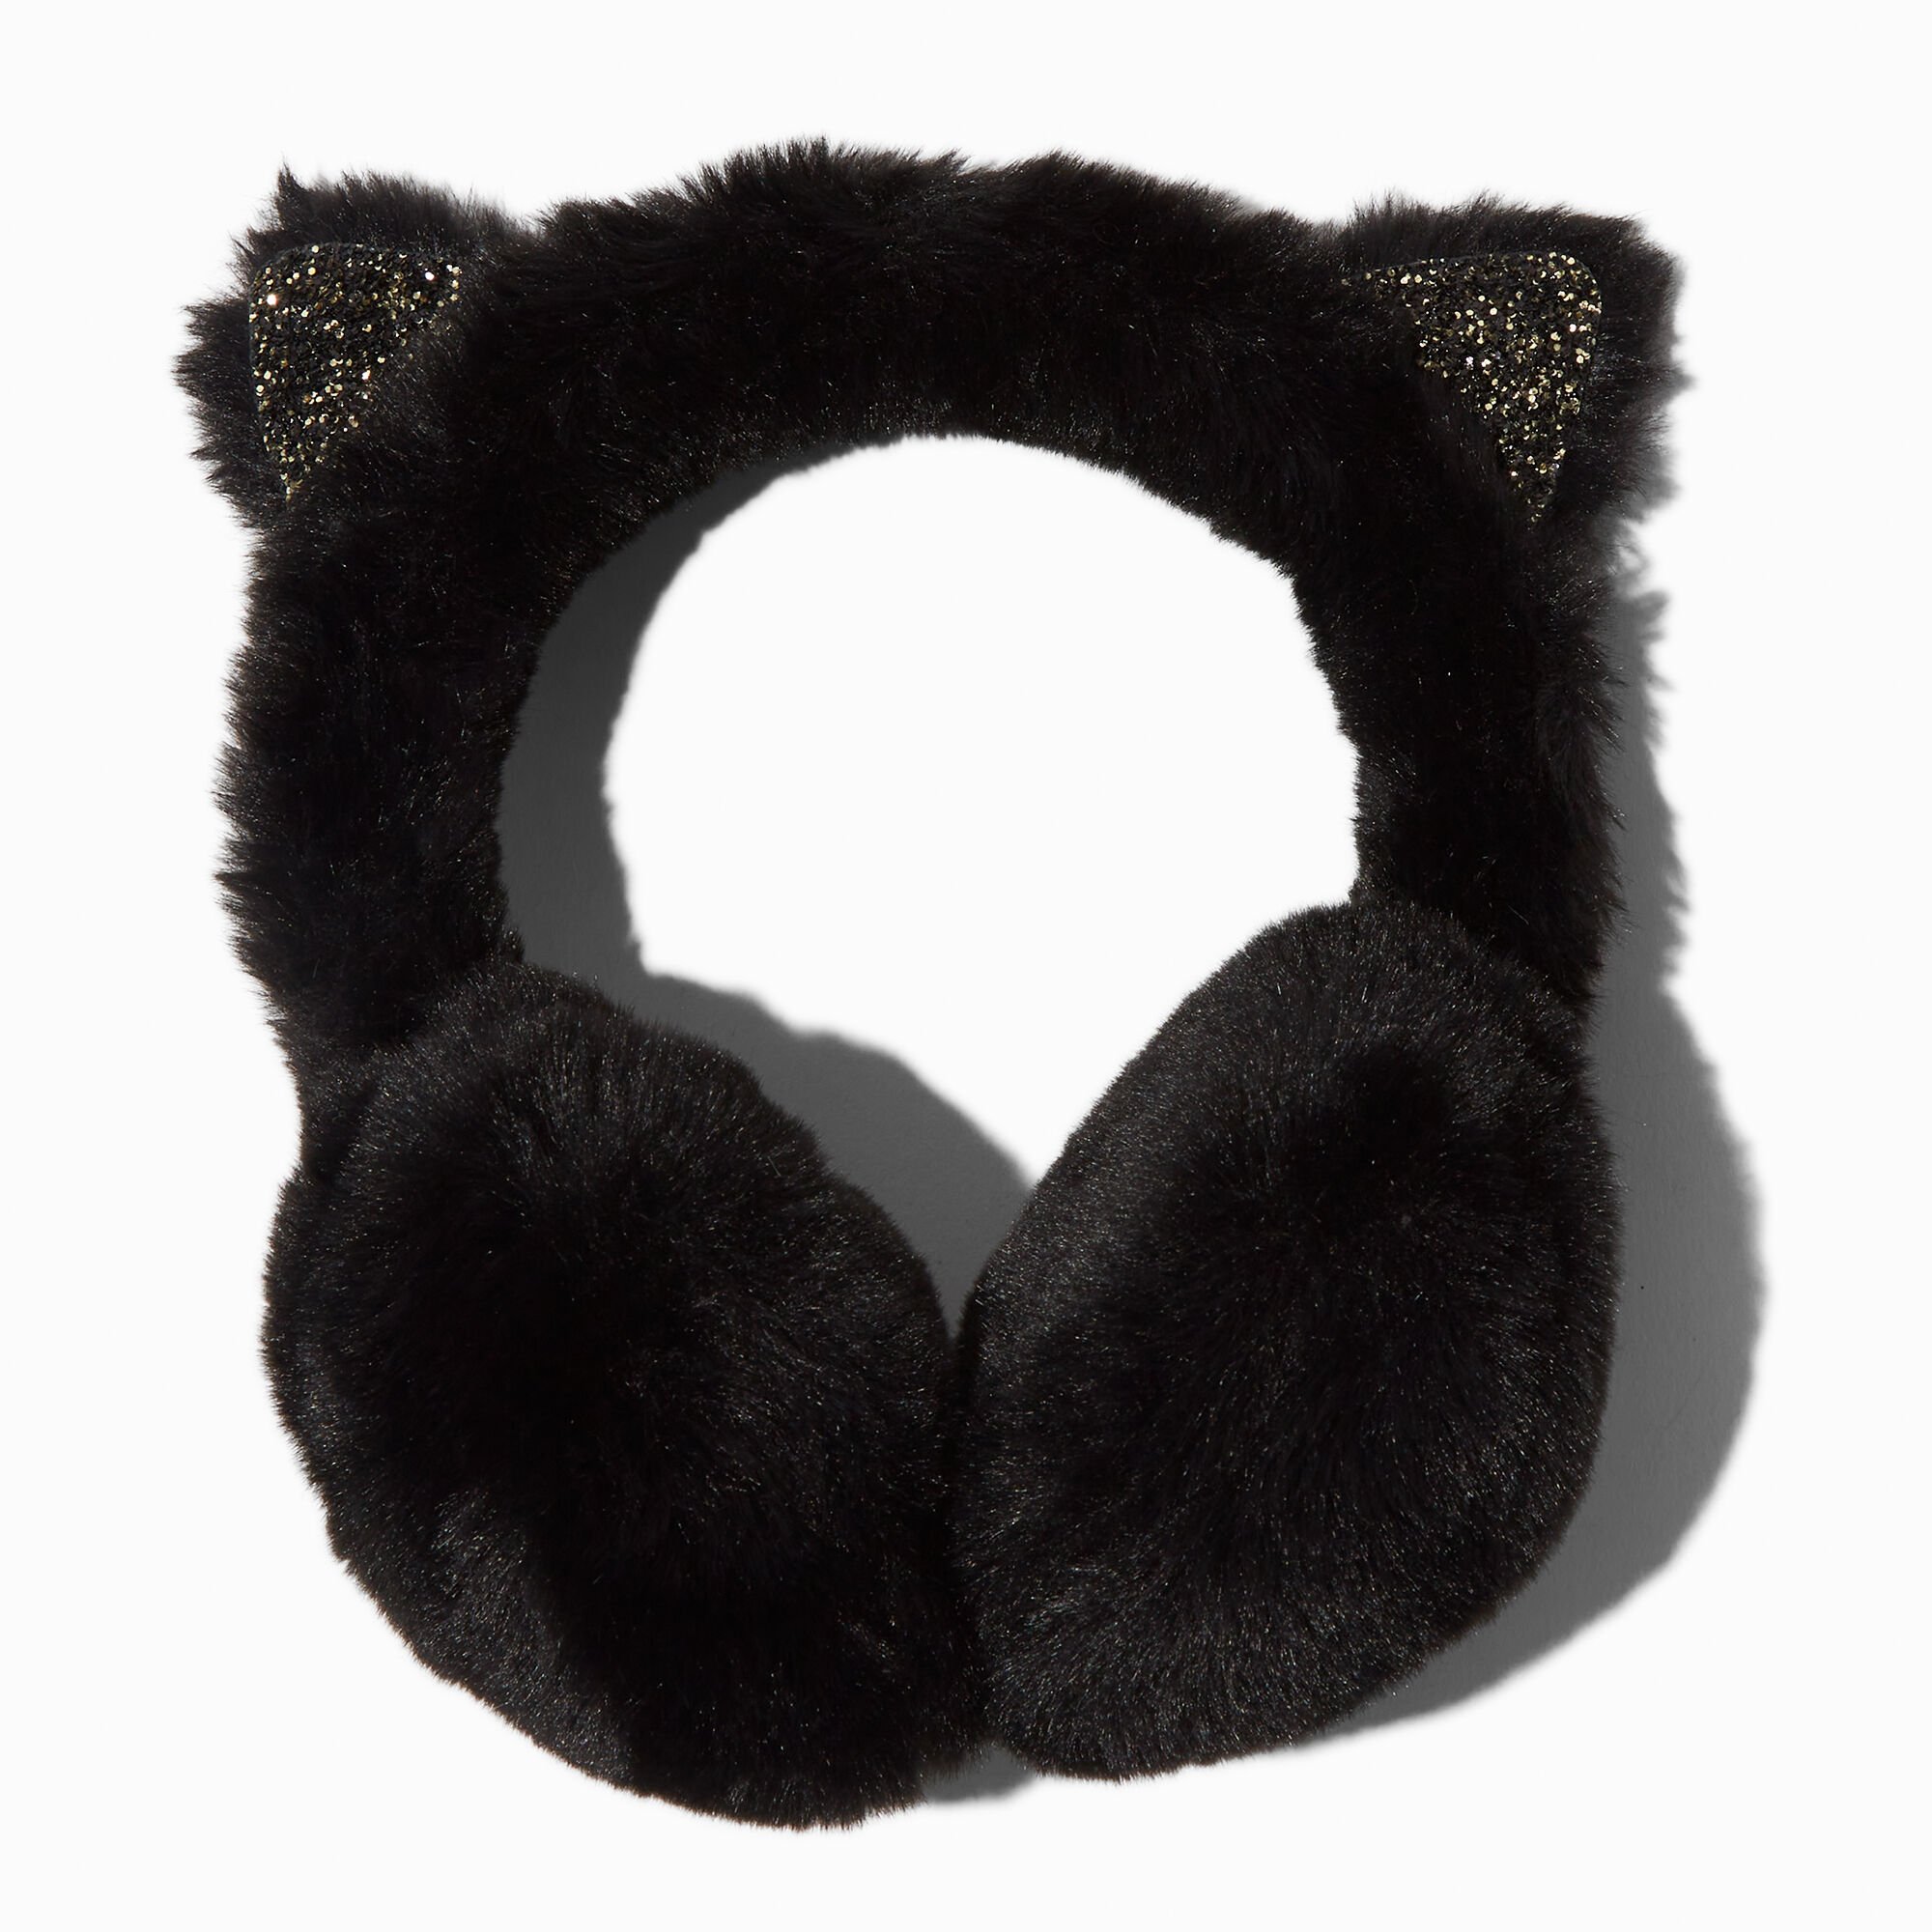 View Claires Cat Earmuffs Black information